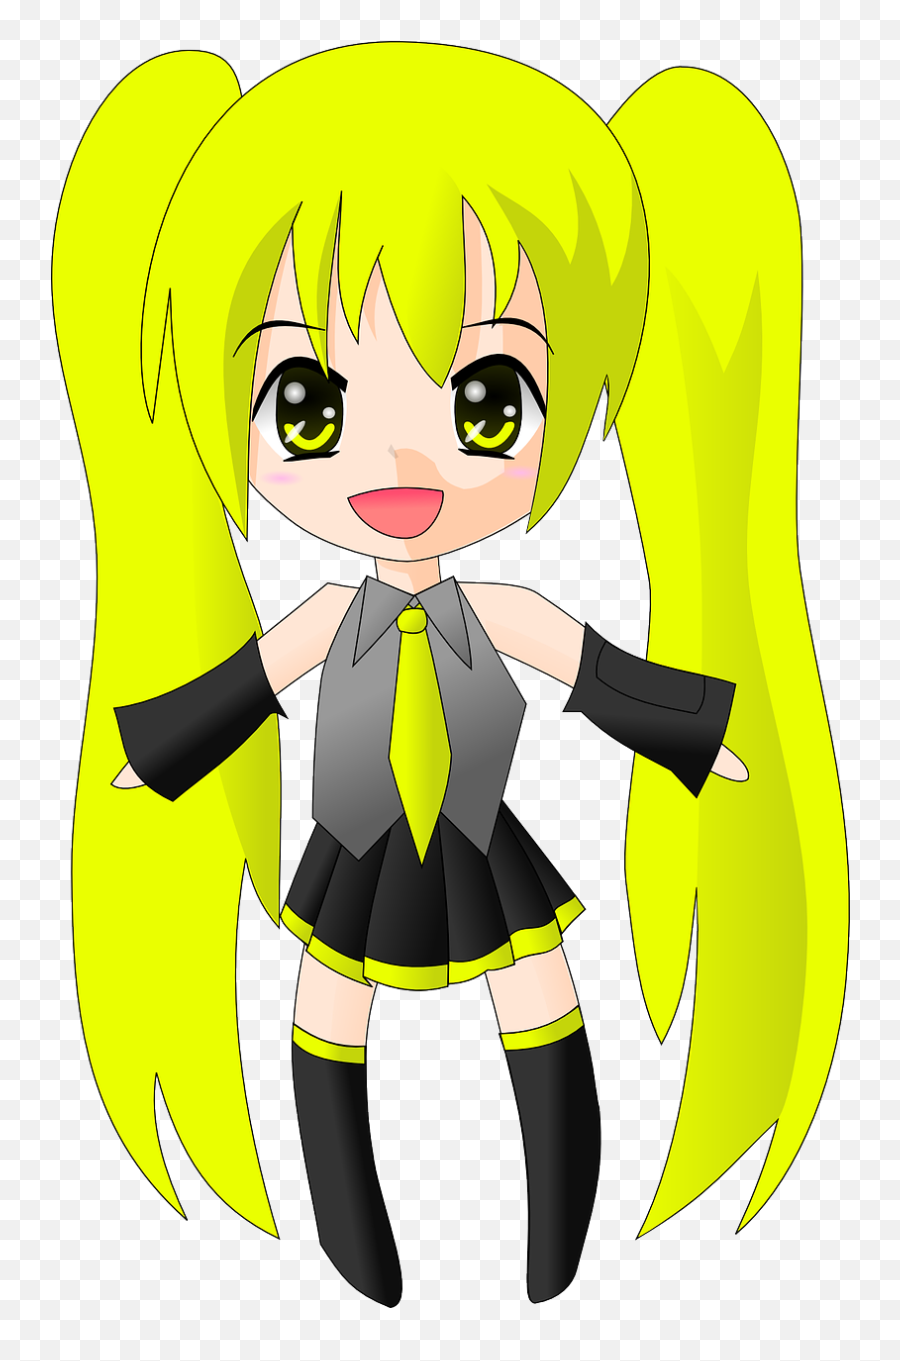 Anime Girl Happy - Free Vector Graphic On Pixabay Anime Vector Png,Anime Smile Png